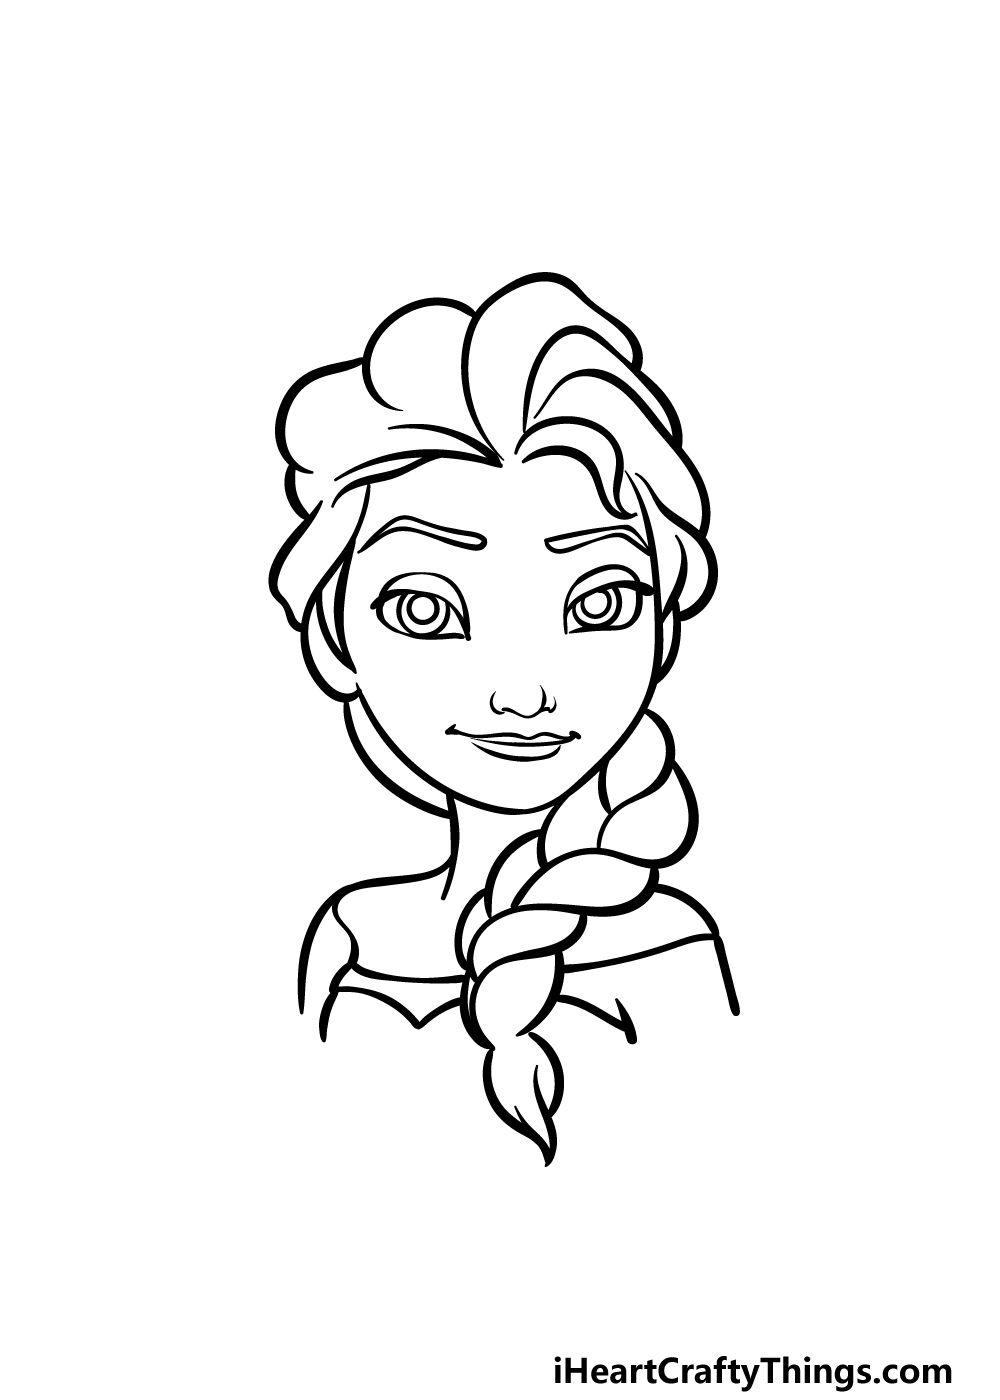 frozen 2 Elsa drawing the sketch in easy way|outline art master|drawing  tutorial - YouTube